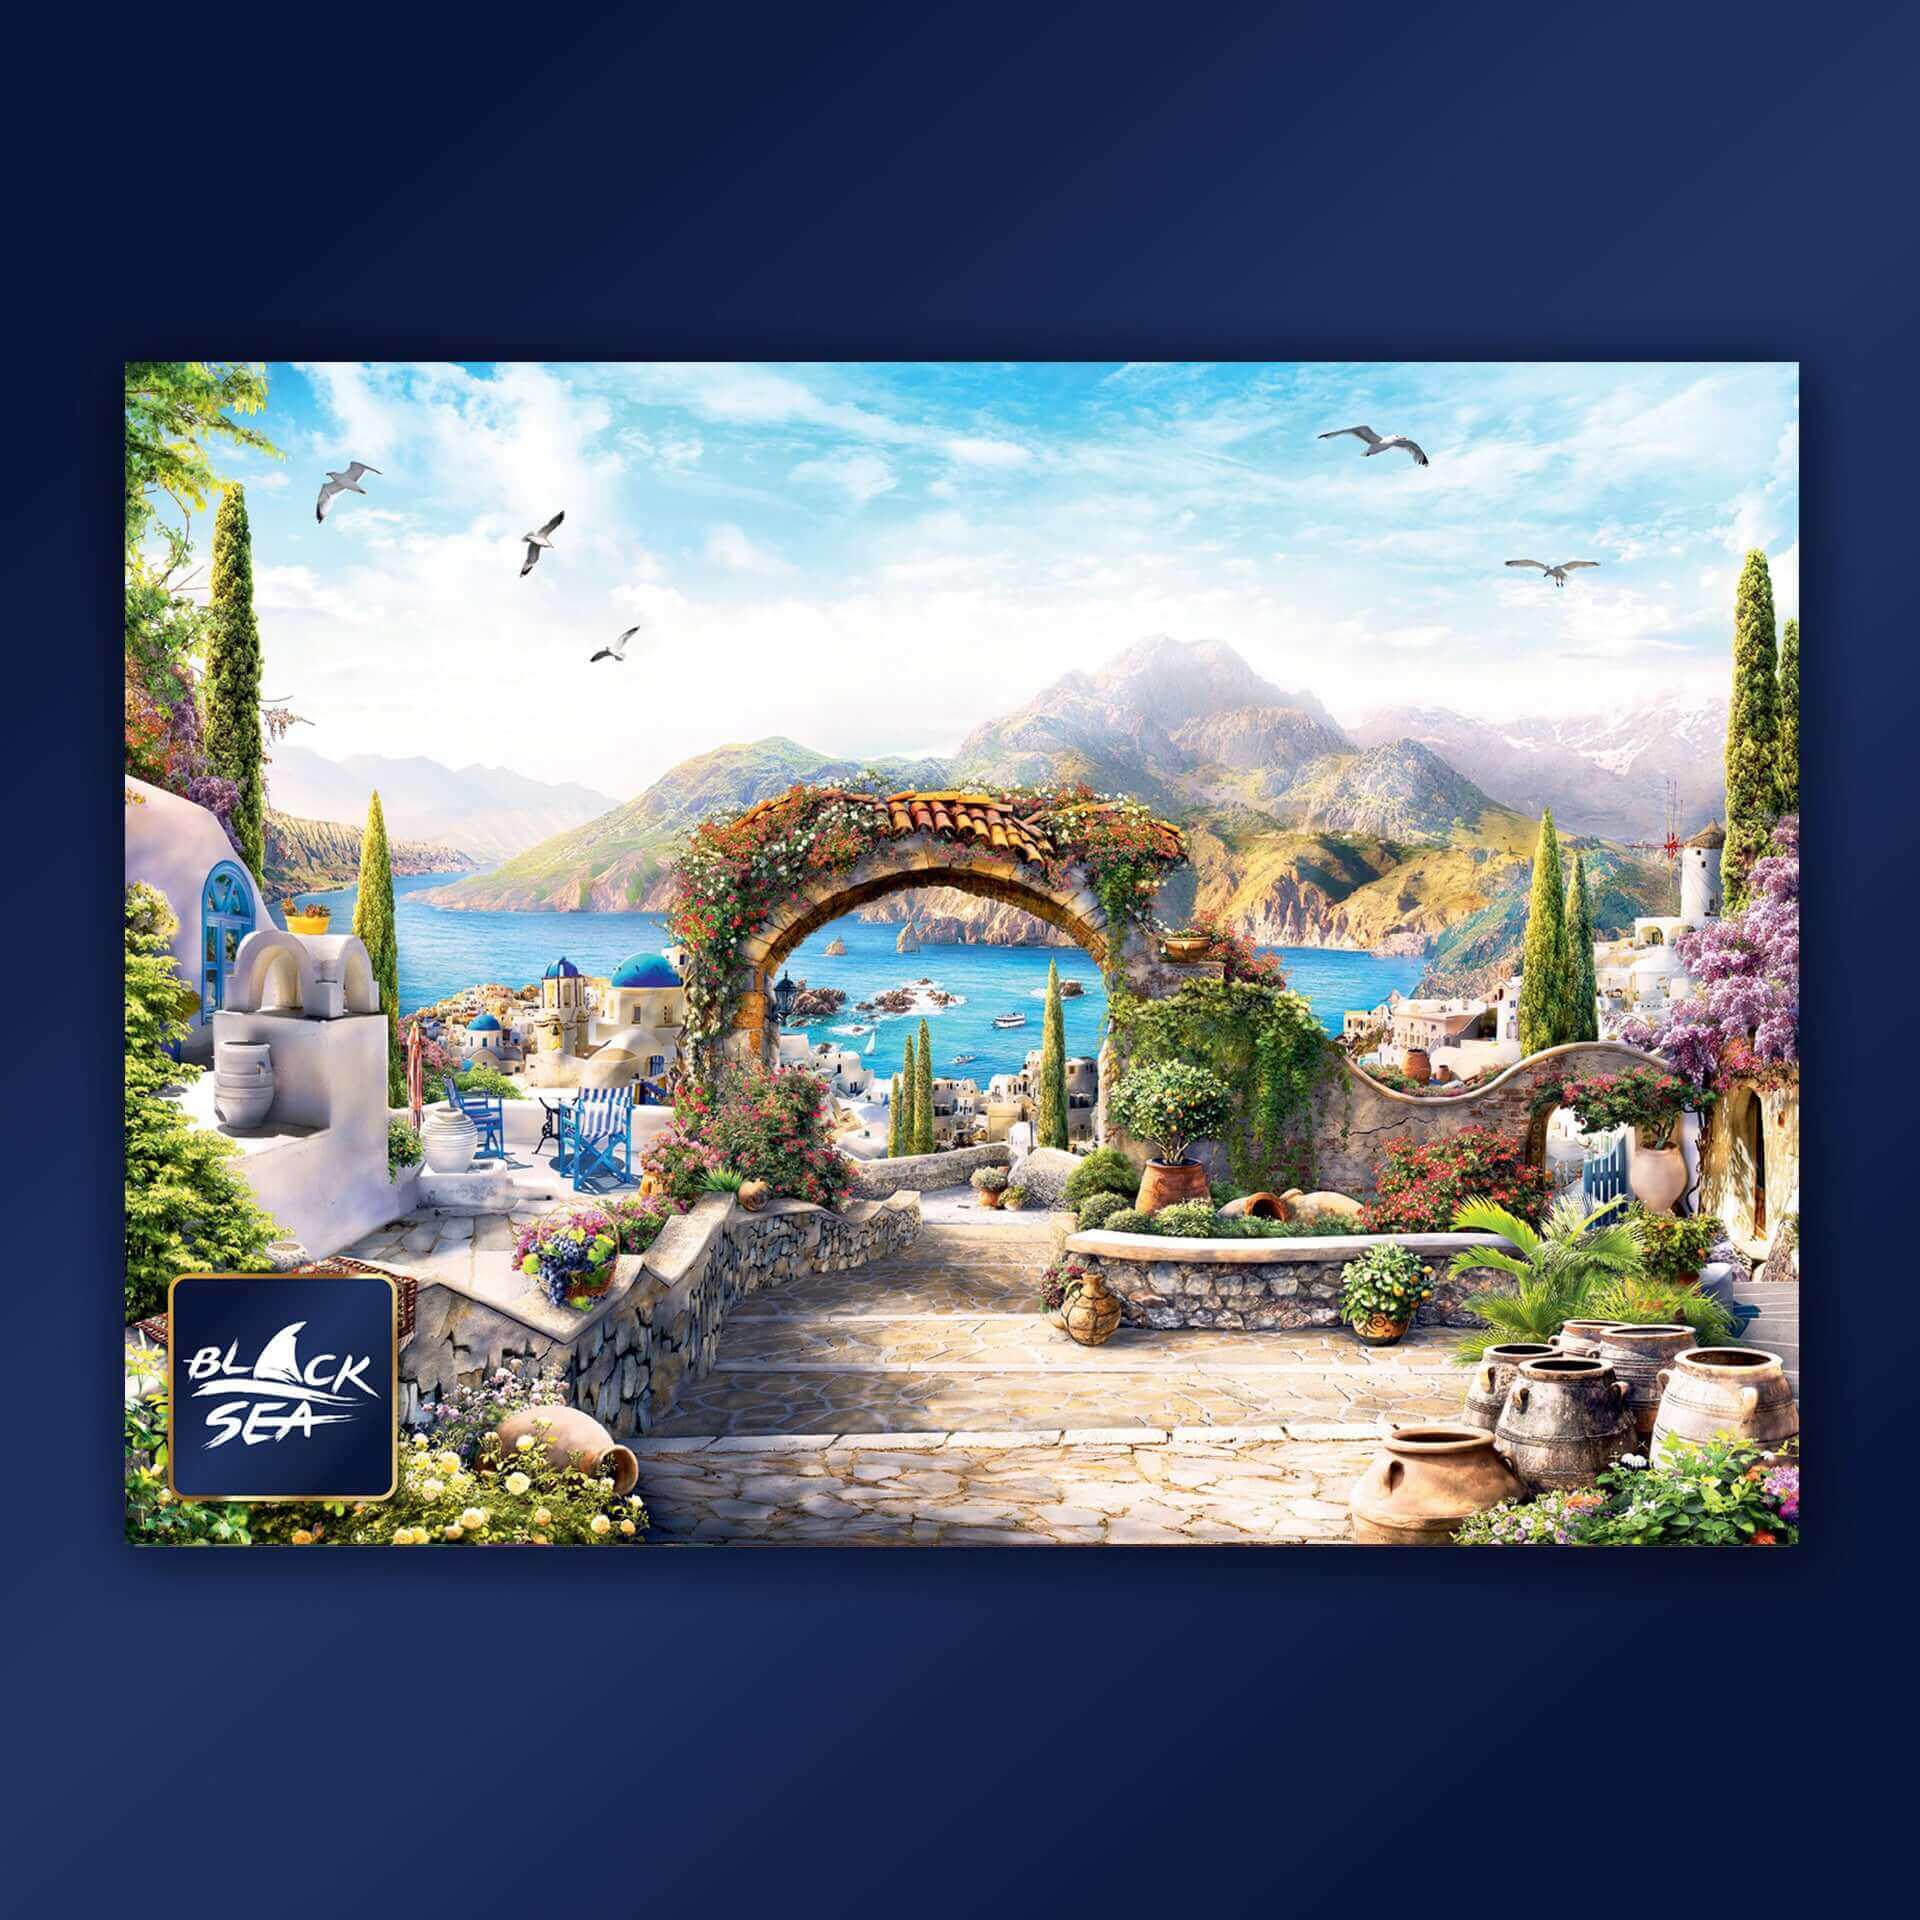 Puzzle Black Sea 1000 pieces - Sunny Greece, Go for a walk by the sea in the lush summer and let its soft, blue peace overwhelm you. Feel the caress of the rays of the sun slowly turning your skin into bronze. The soft rhythm of the waves is disturbed onl